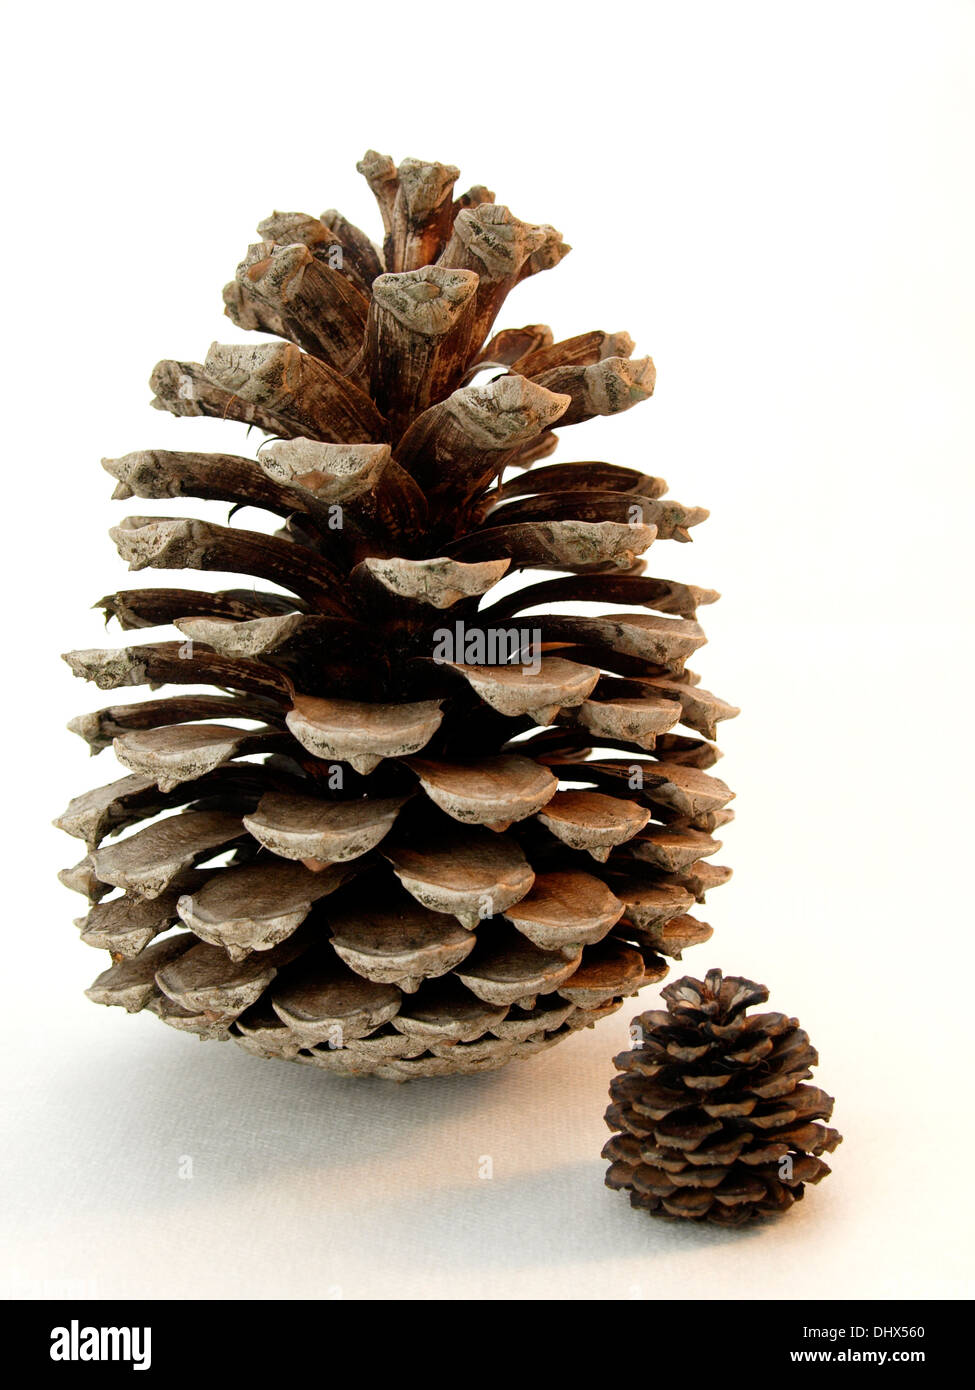 Large and small pine cones Stock Photo